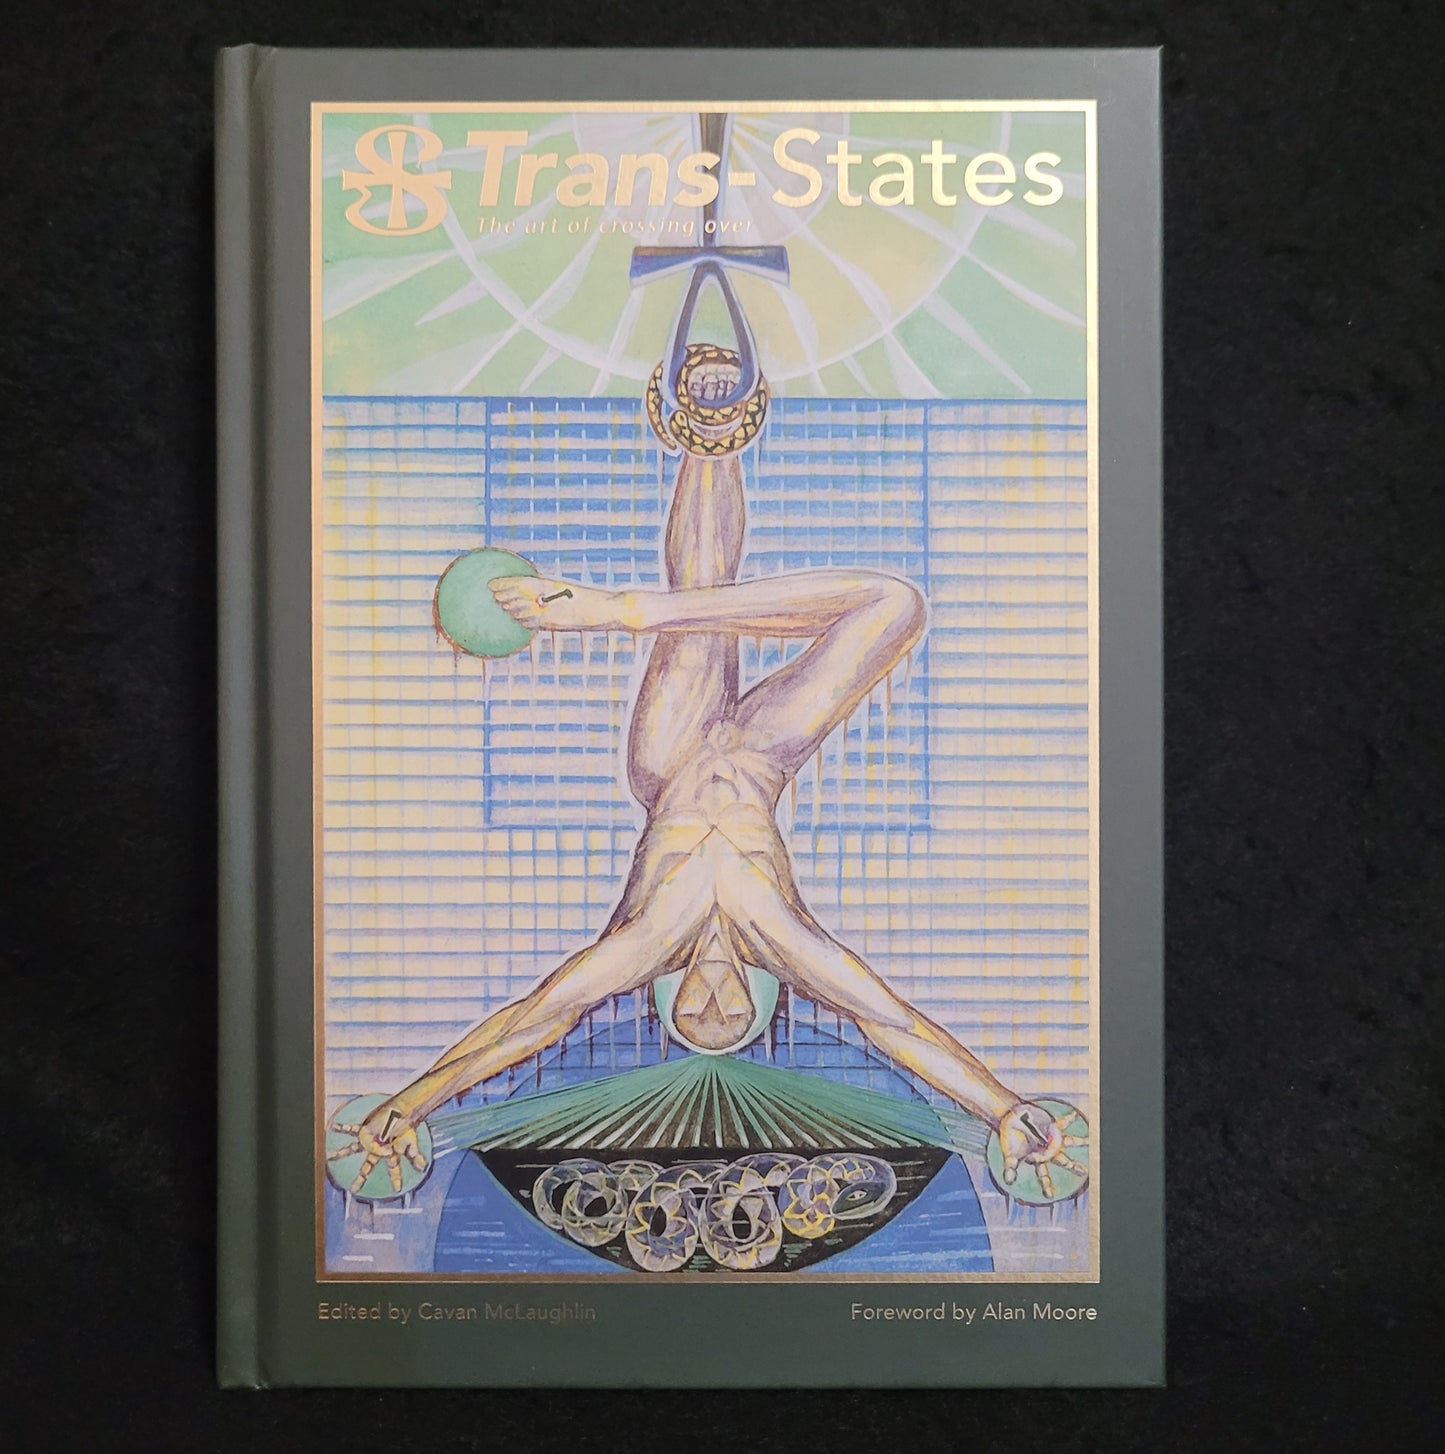 Trans-States: The Art of Crossing Over Edited by Cavan McLaughlin Foreword by Alan Moore (Fulgur Press, 2019) Hardcover